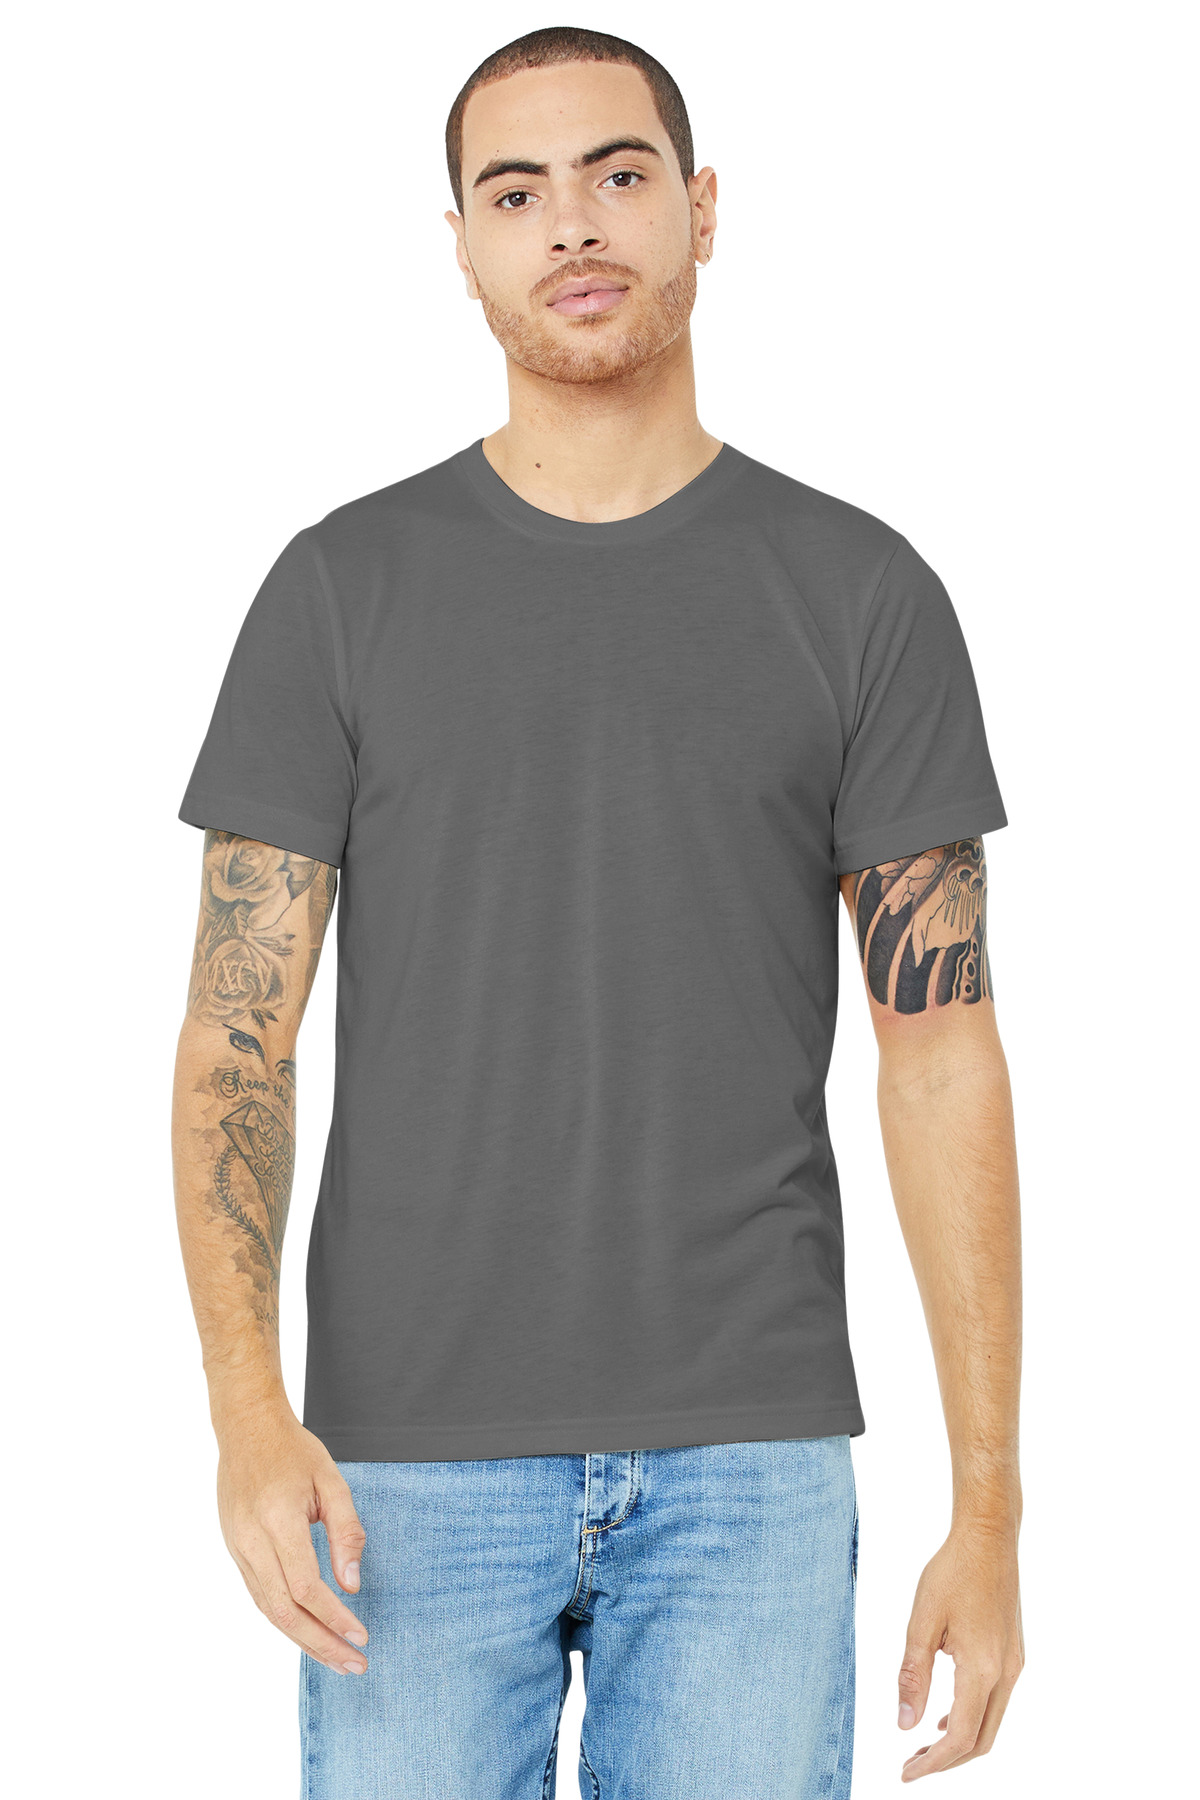 BELLA+CANVAS Unisex Made In The USA Jersey Short Sleeve Tee-